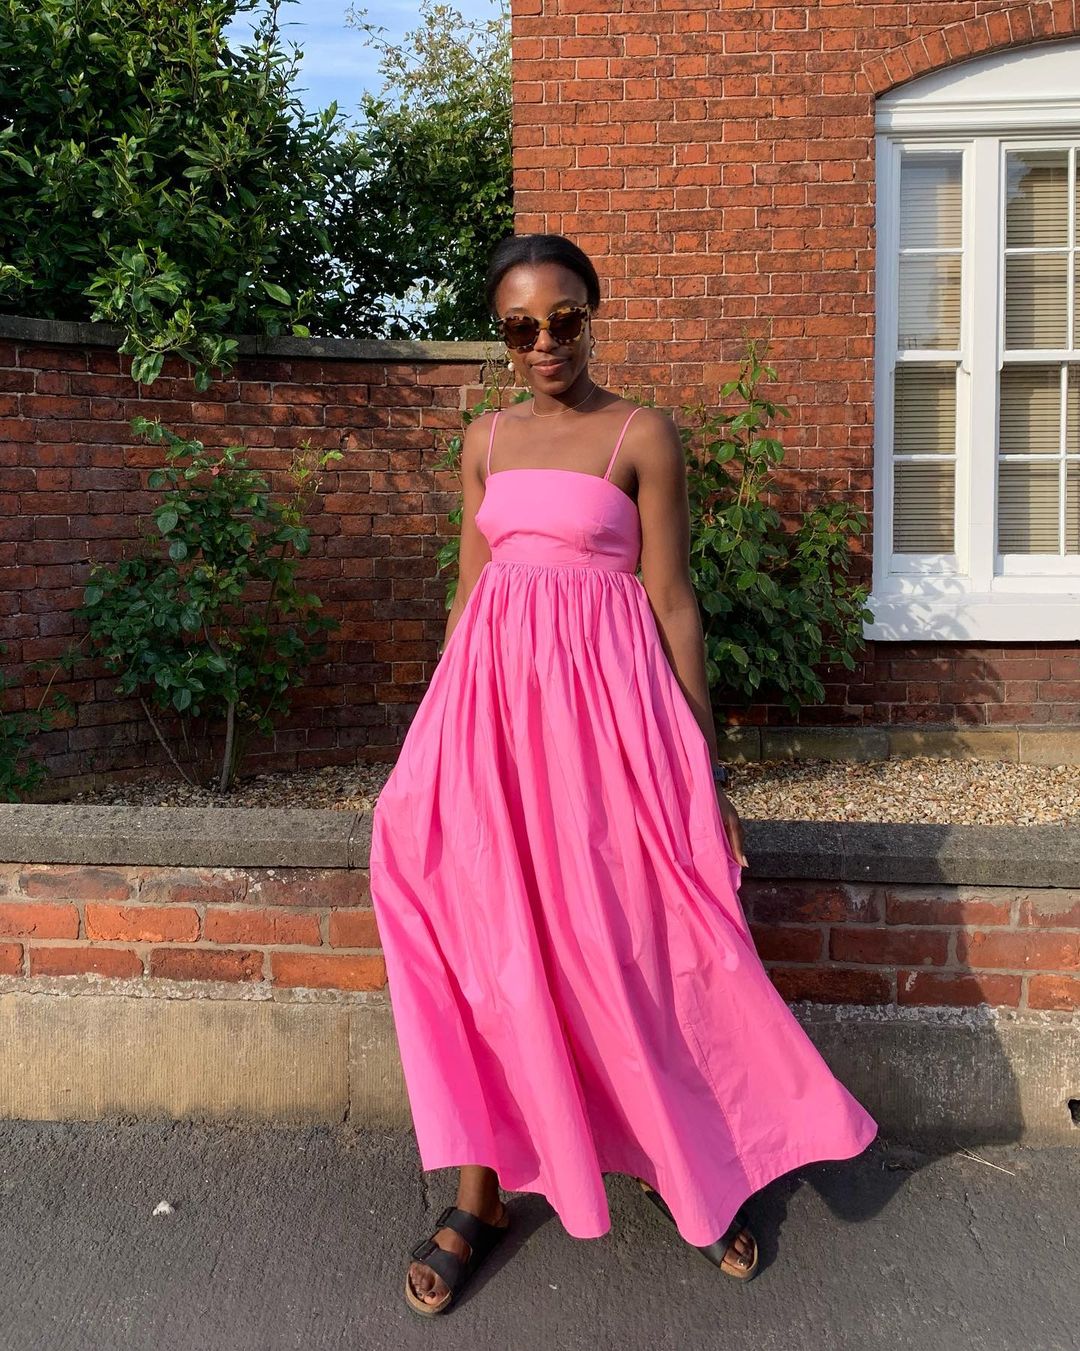 How to style a maxi dress: @taffymsipa